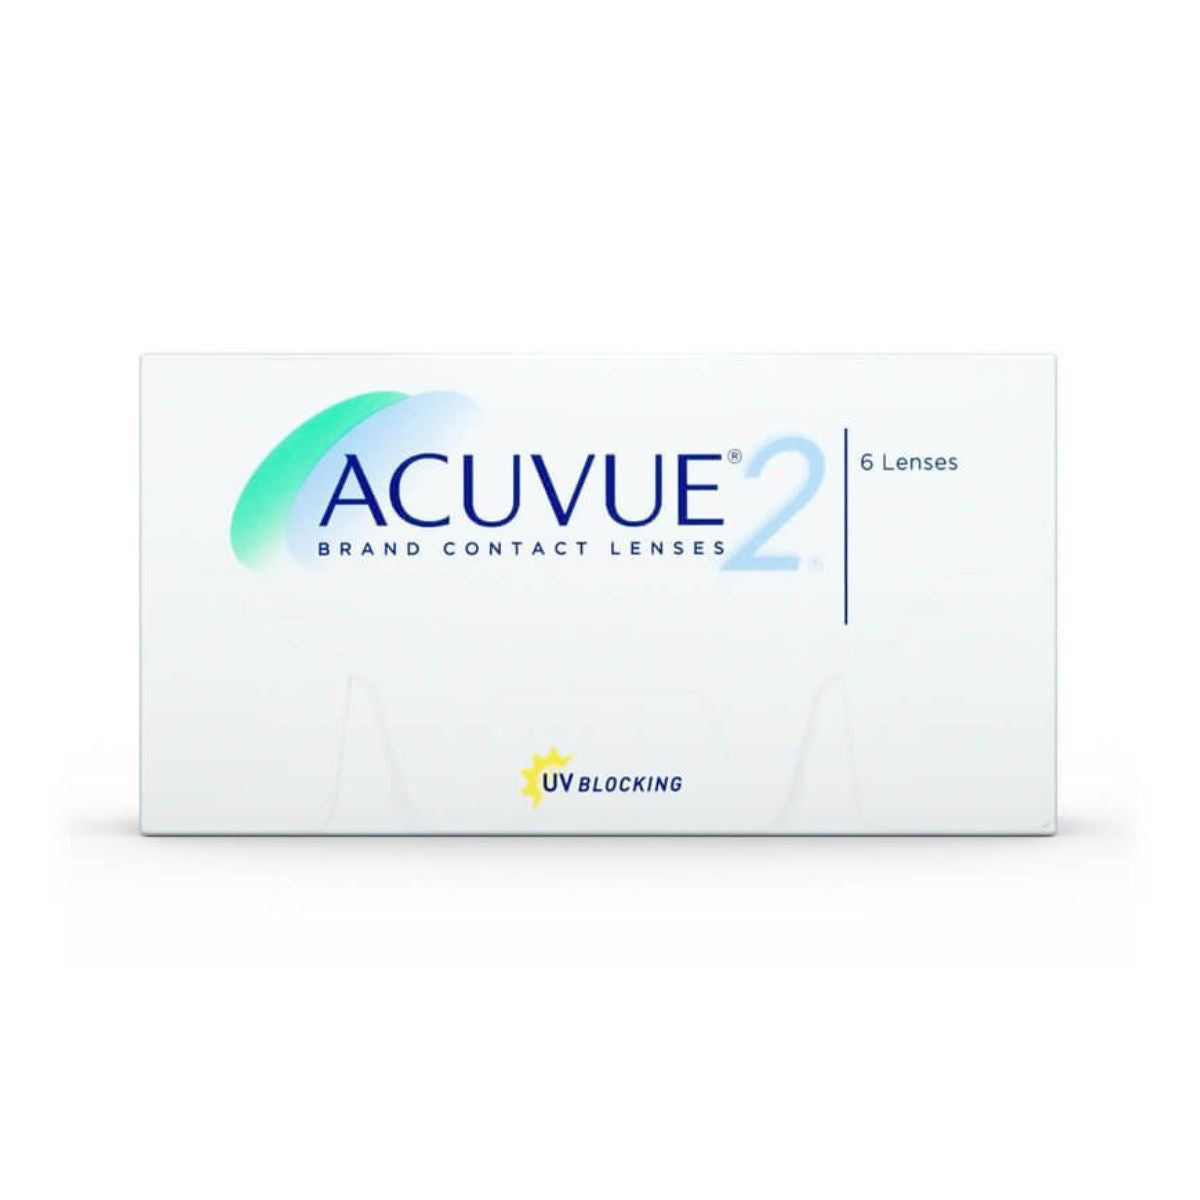 "Acuvue 2 Contact Lenses by Jhonson & Jhonson Bi Weekly Branded Options "